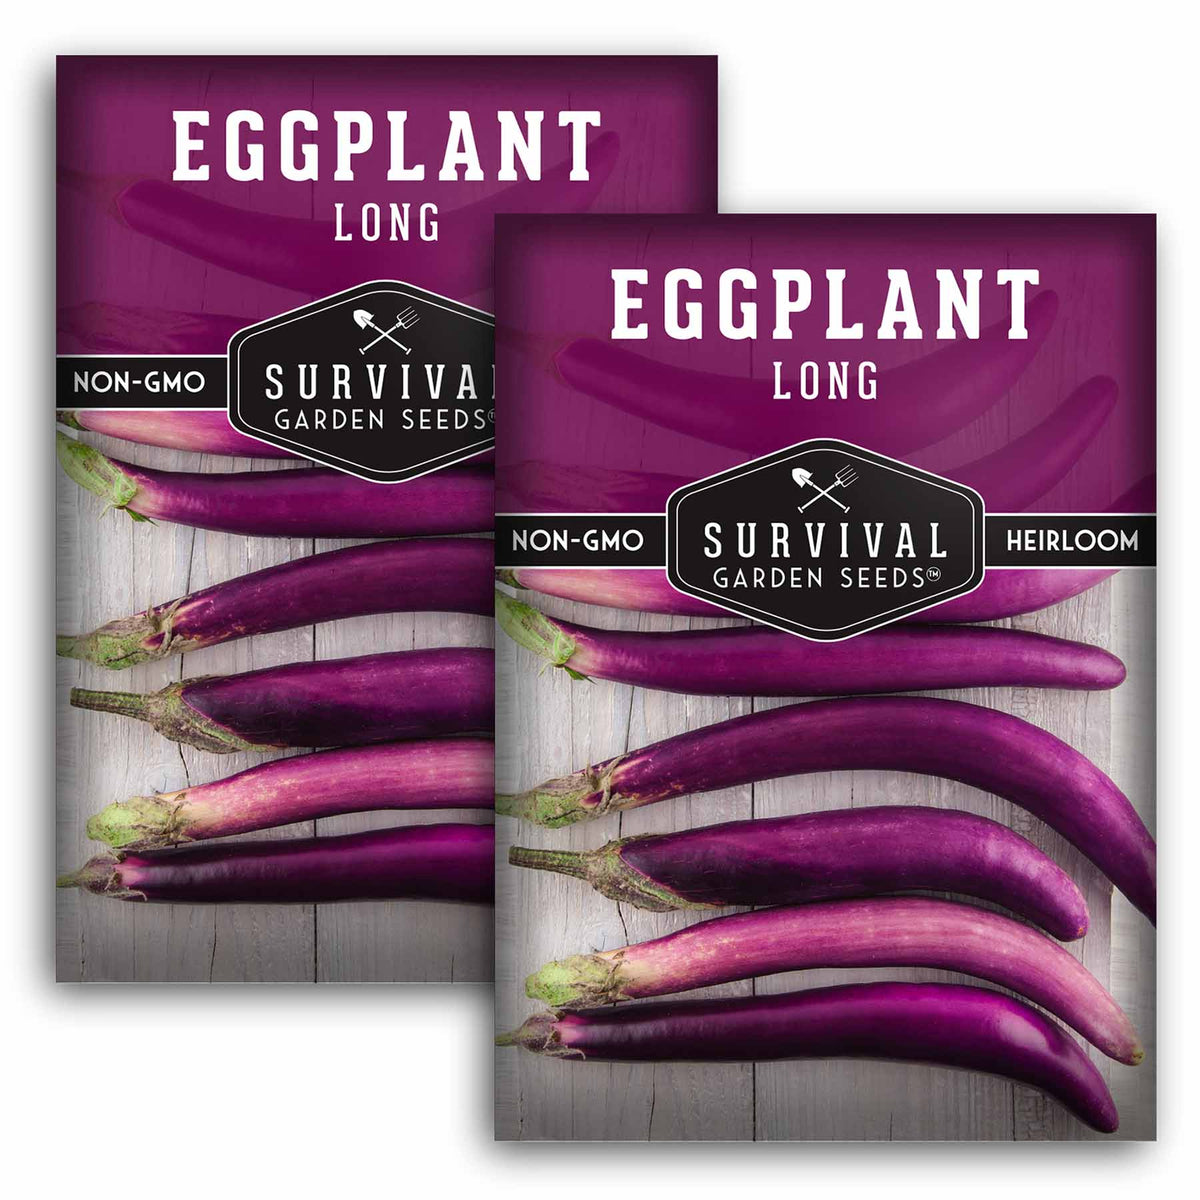 2 packets of Long Eggplant seeds